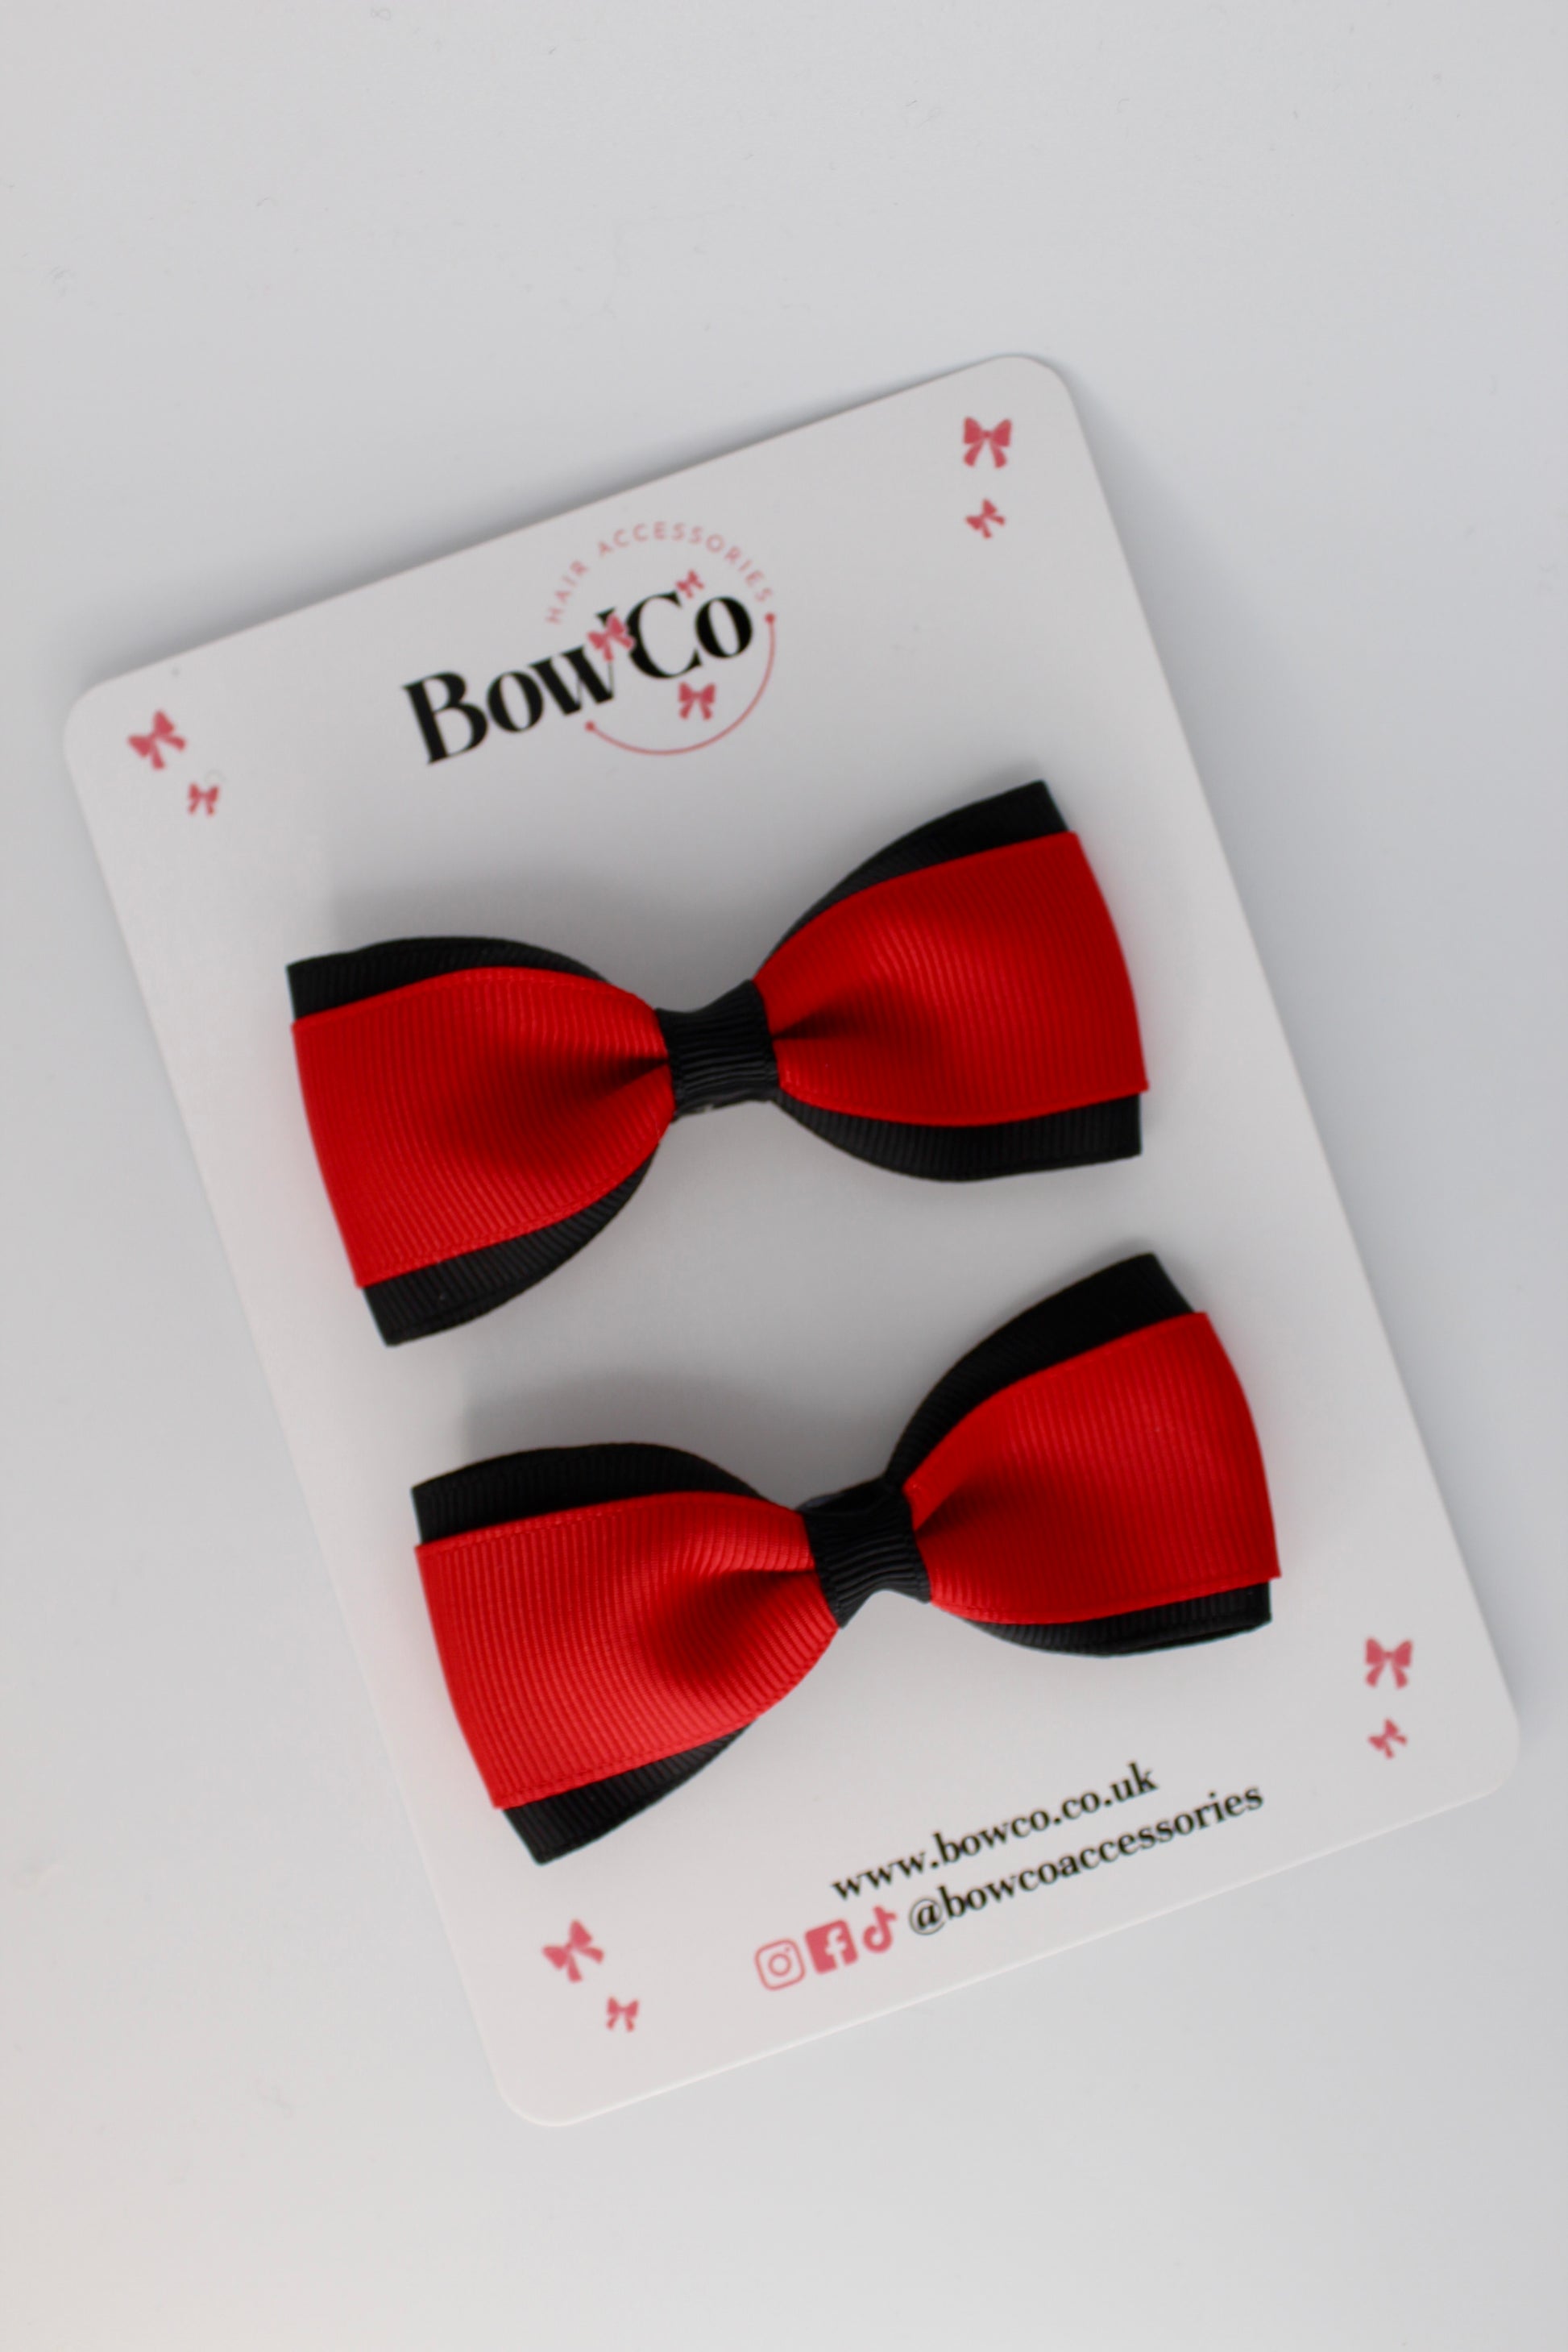 3 Inch Tuxedo Bow - Clip - 2 Pack - Red and Black